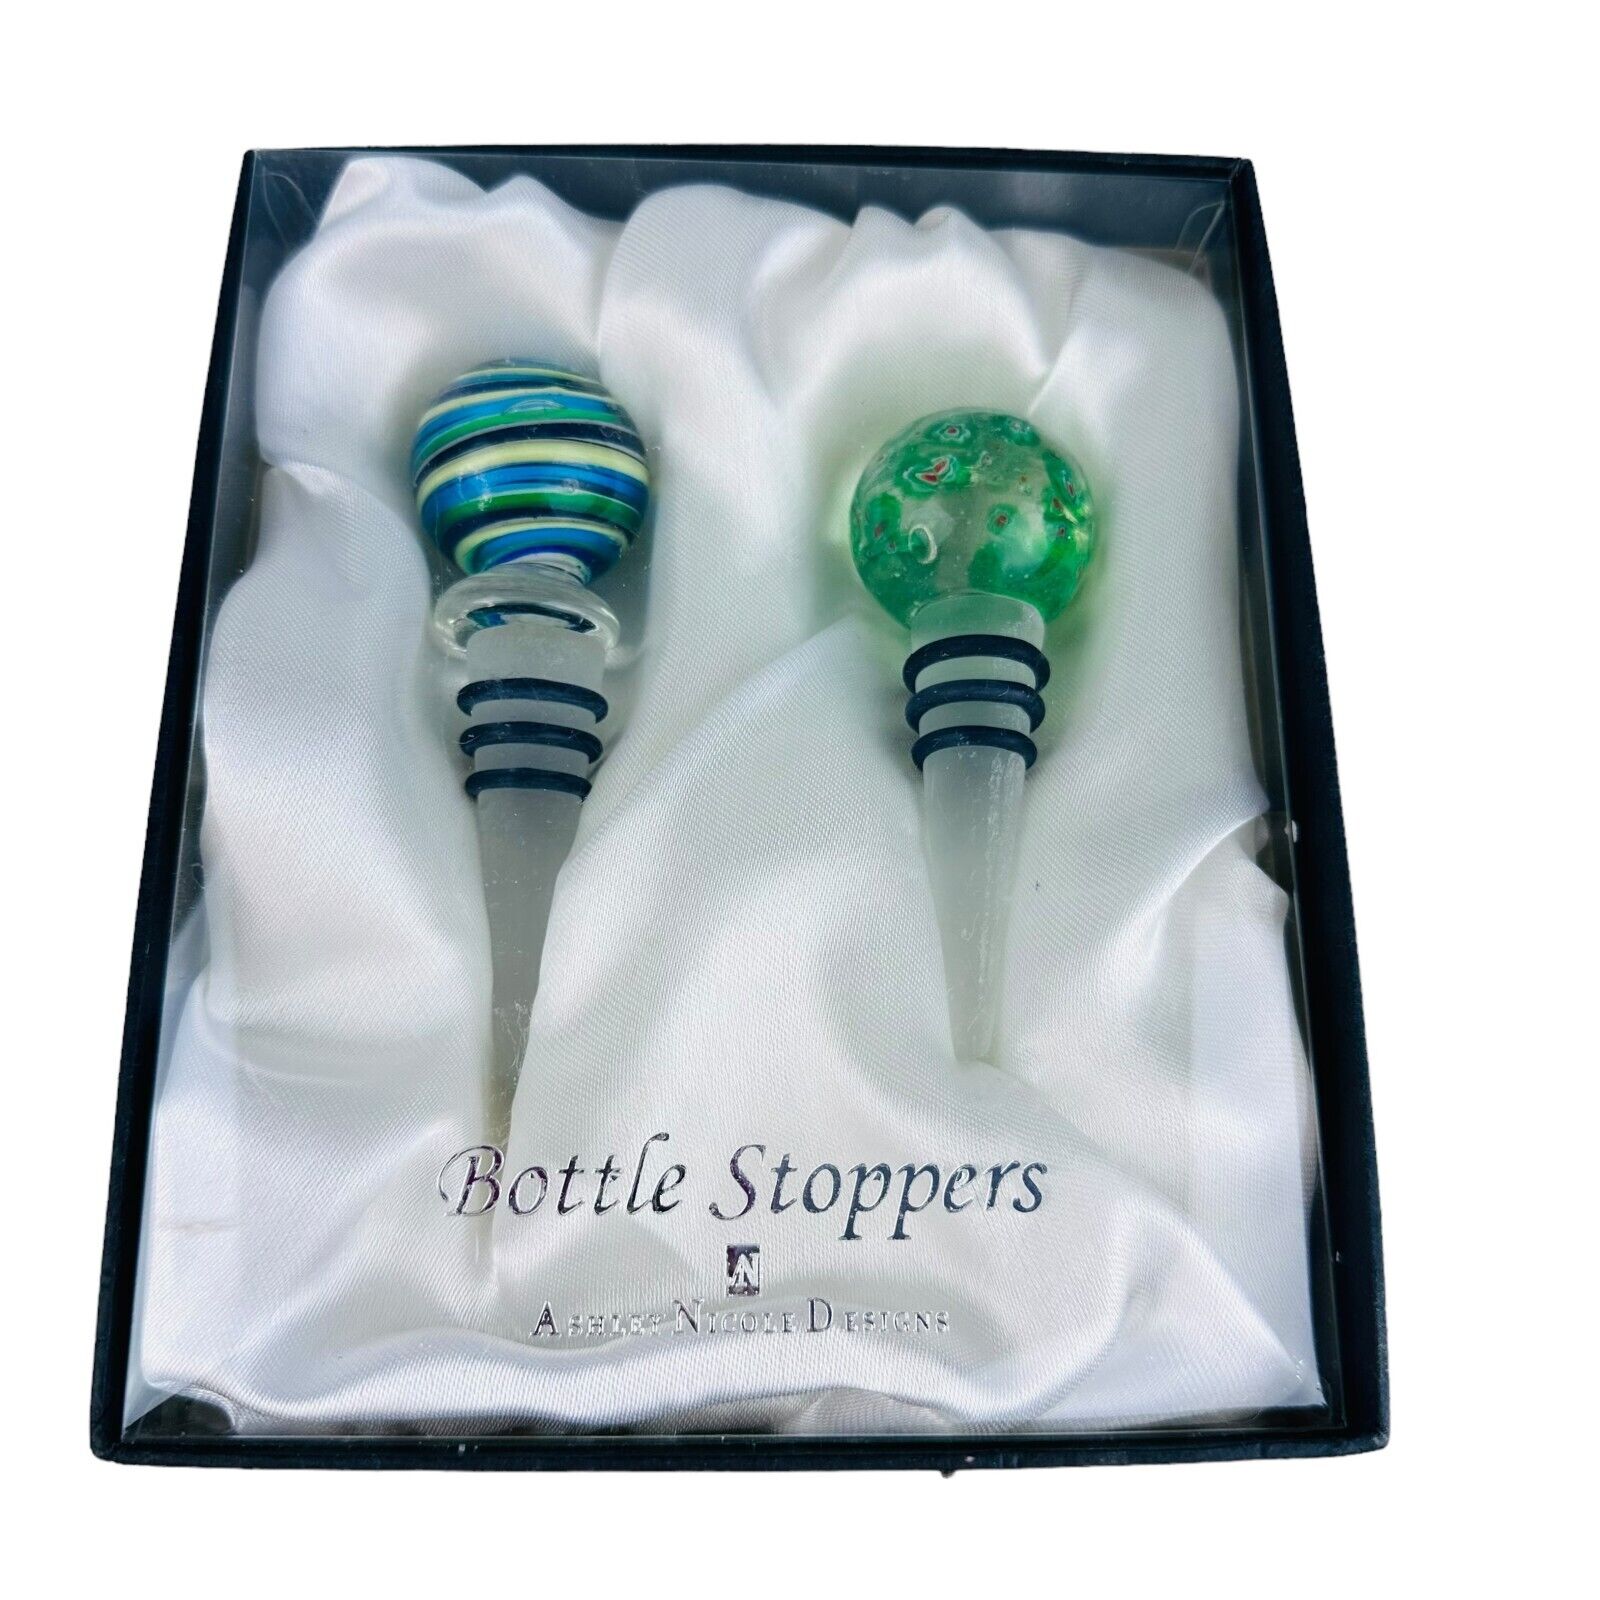 art glass bottle stoppers by Ashley Nicole